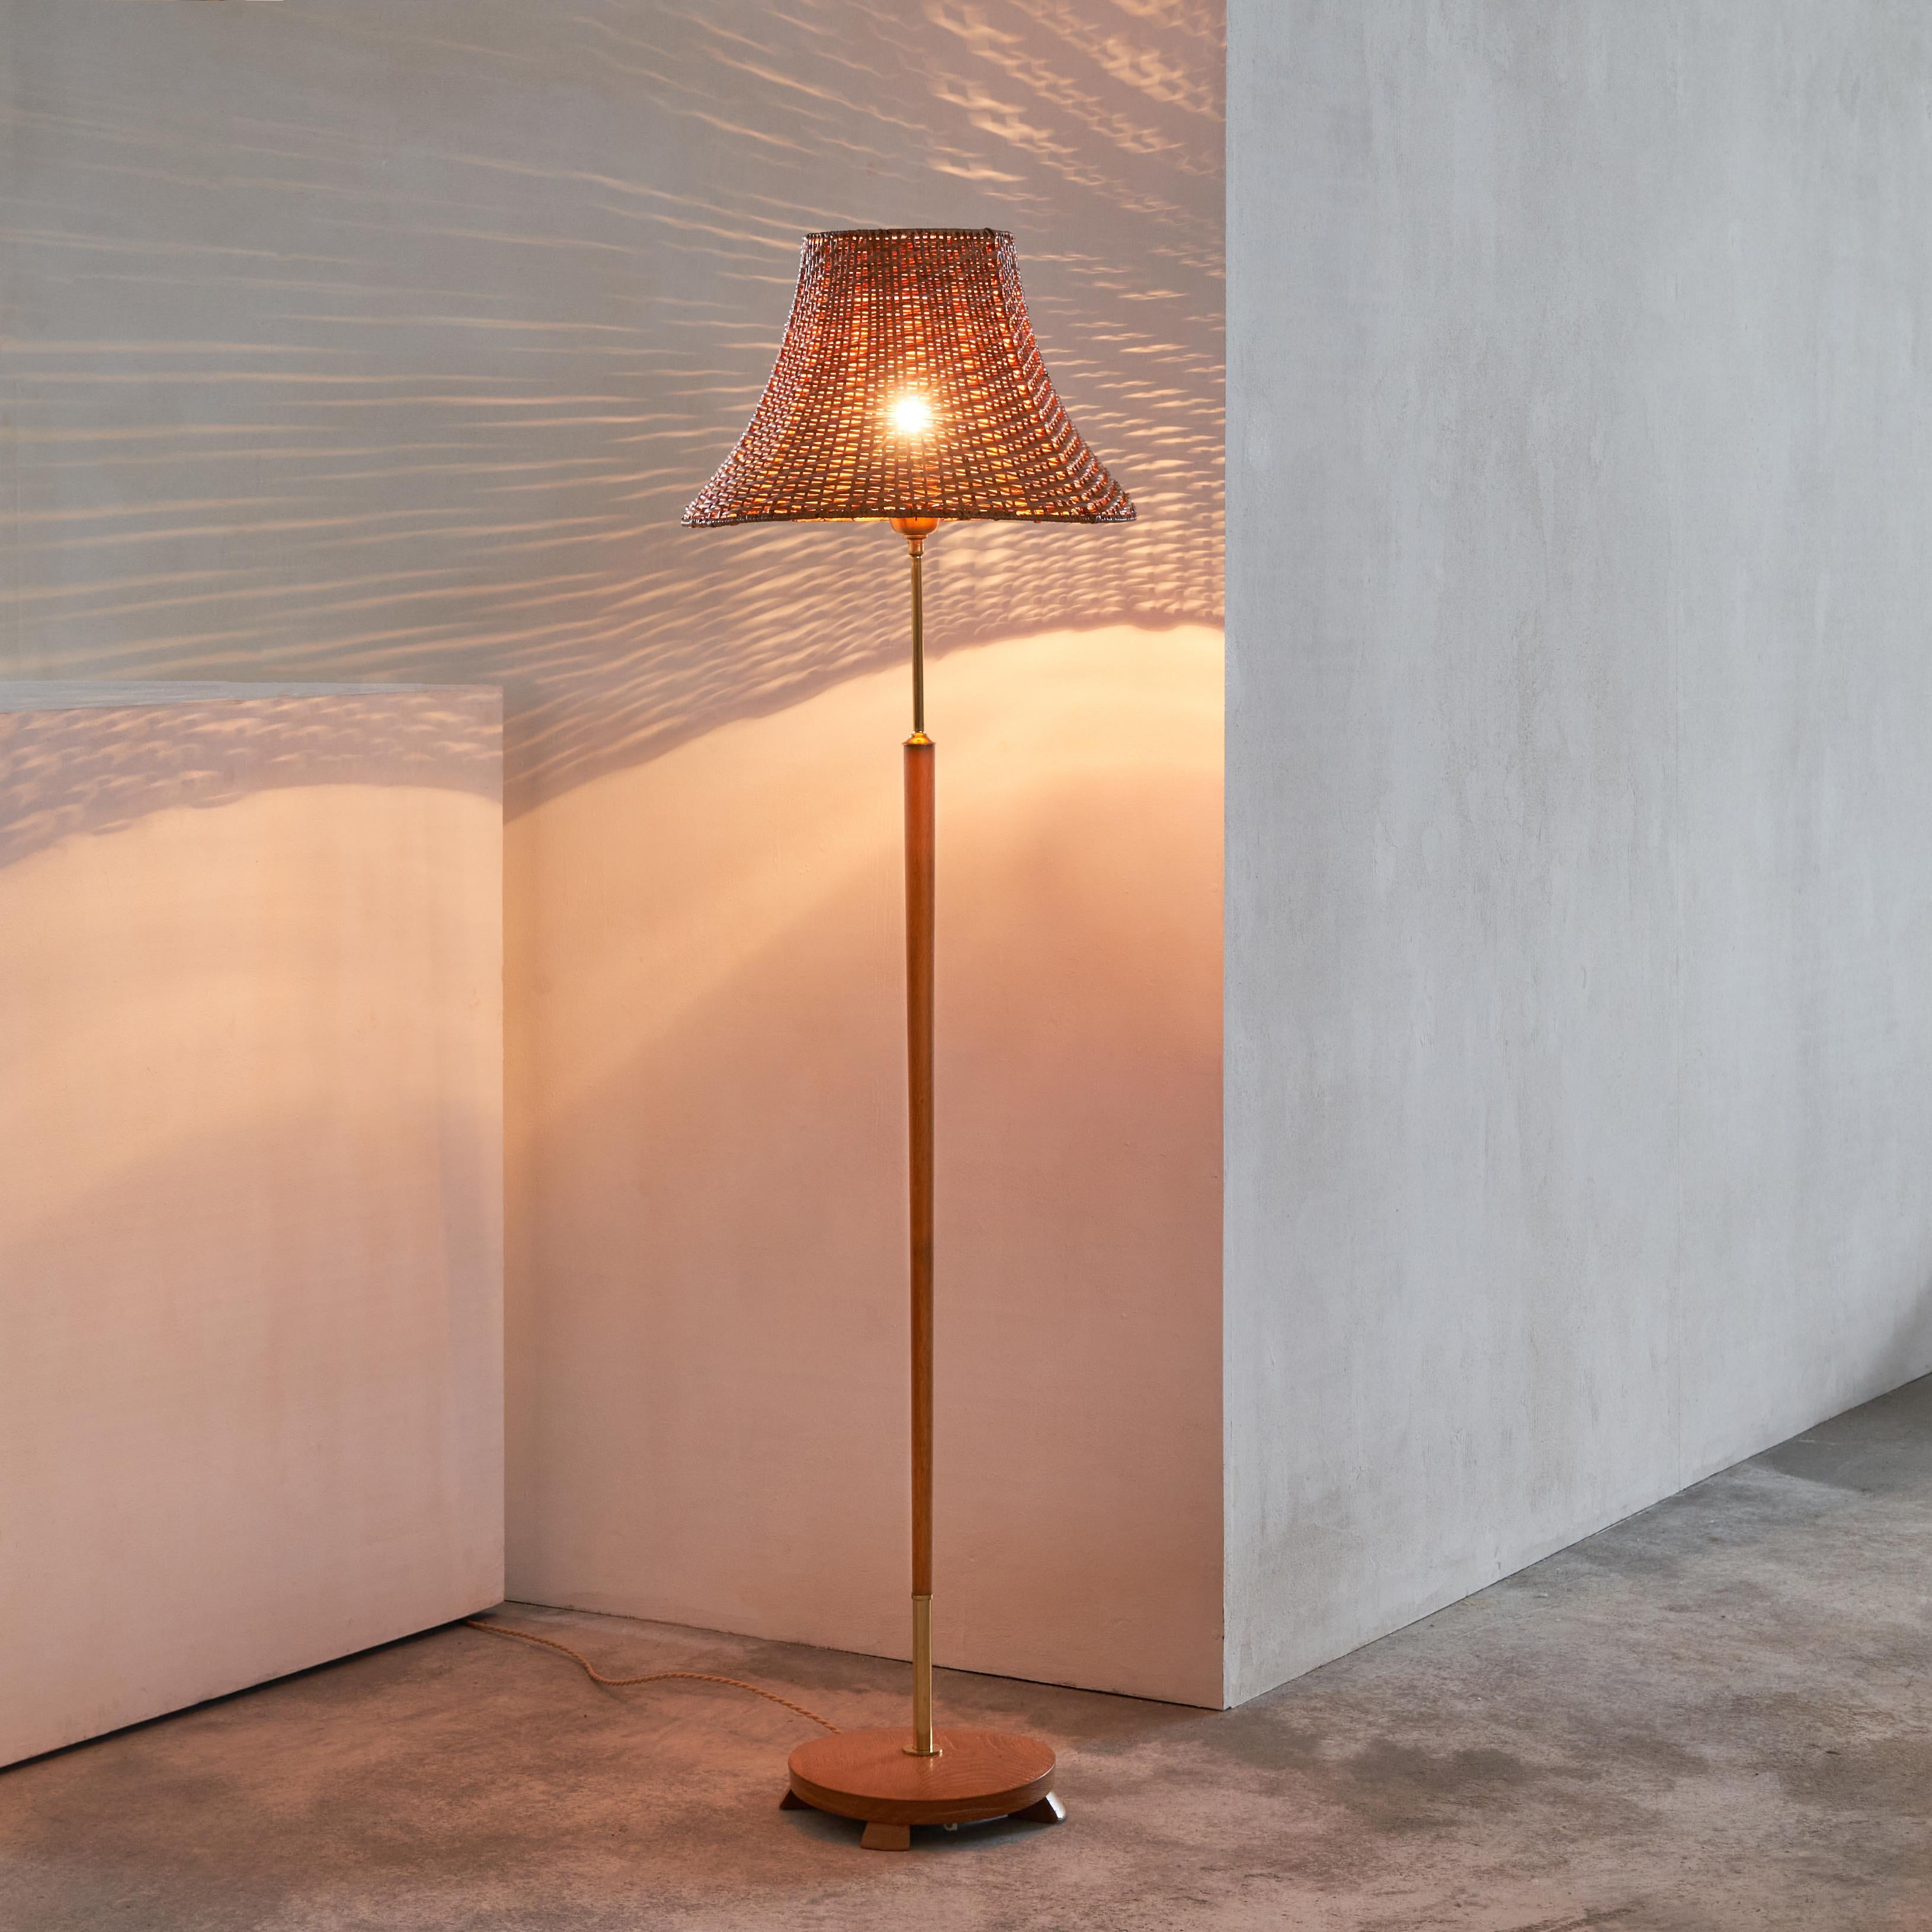 Göteborgs Armaturhantverk floor lamp in oak and patinated brass. Sweden, 1950s.

This is a wonderful midcentury floor lamp of Swedish origin. Made by Göteborgs Armaturhantverk this lamp features a beautiful combination of light oak, brass and